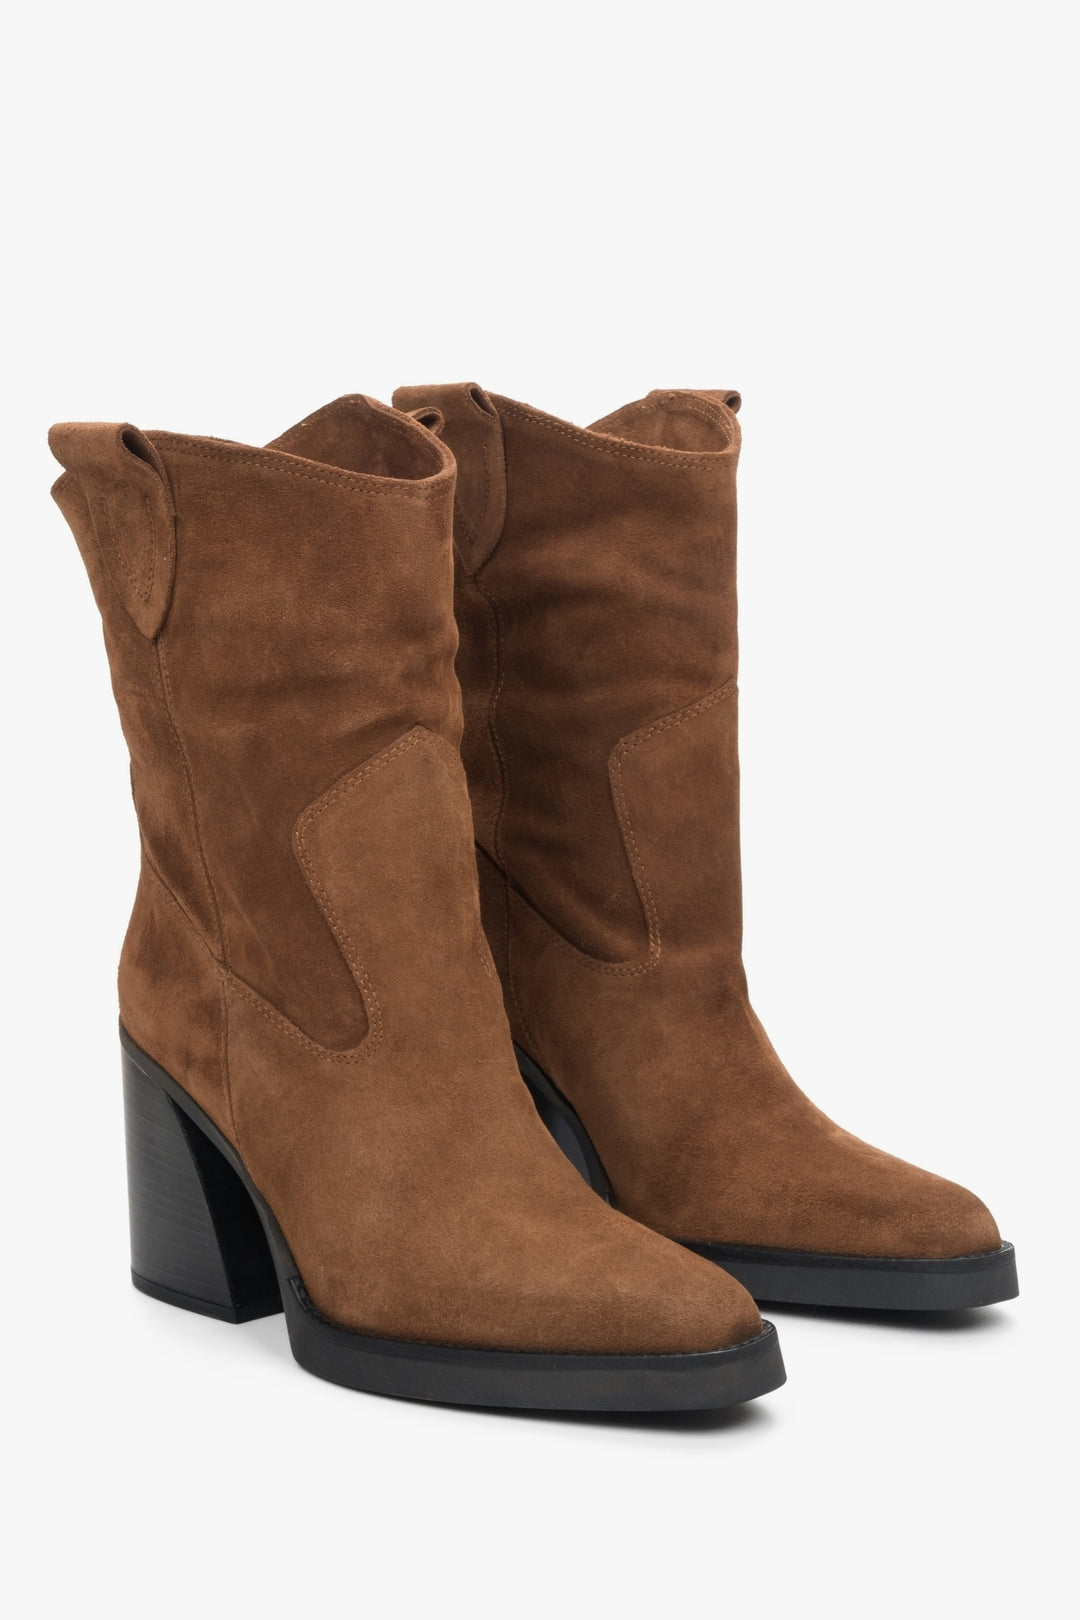 Heeled cowboy boots in brown.